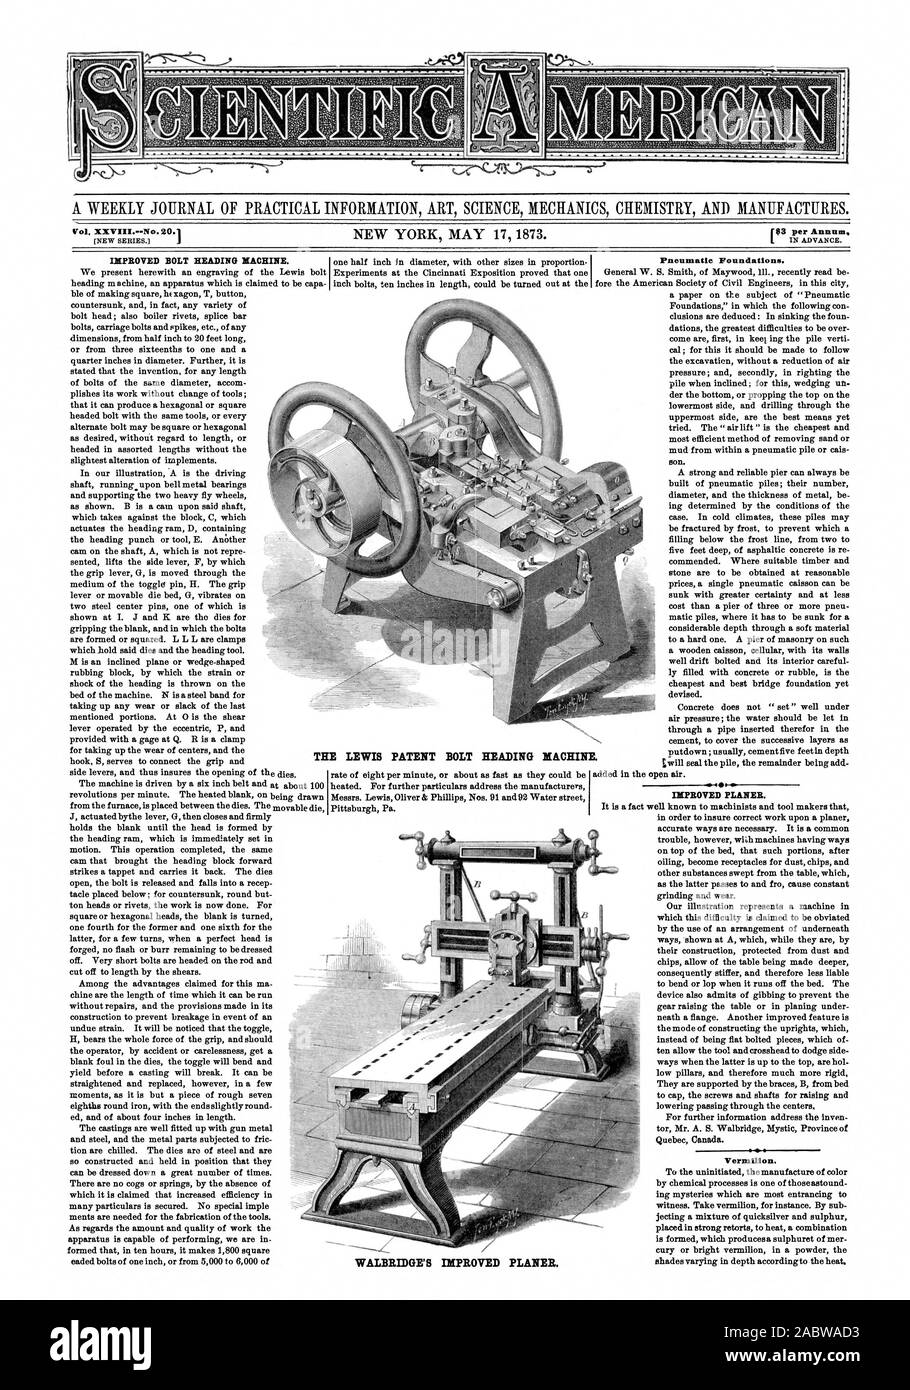 A WEEKLY JOURNAL OF PRACTICAL INFORMATION ART SCIENCE MECHANICS CHEMISTRY  AND MANUFACTURES. Vol. XXVIII.--No. 20.1 $3 per Annum IMPROVED BOLT HEADING  MACHINE. Pneumatic Foundations. 14) IMPROVED PLANER. Vermilion. THE  MACHINE. LEWIS PATENT